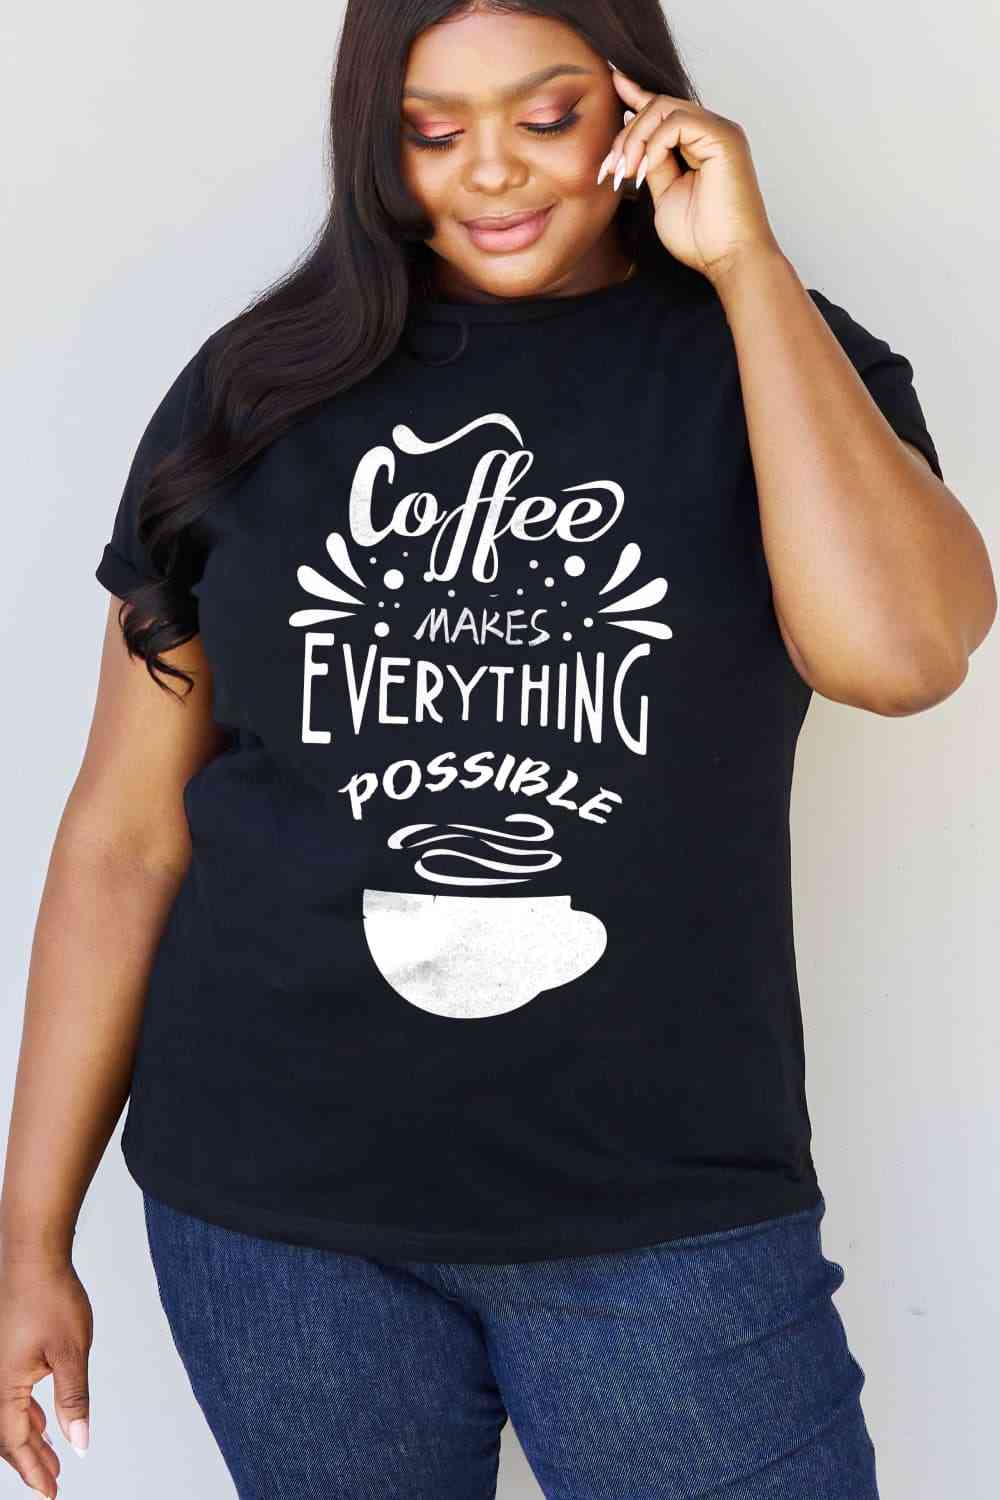 Simply Love Full Size COFFEE MAKES EVERYTHING POSSIBLE Graphic Cotton Tee - TRENDMELO